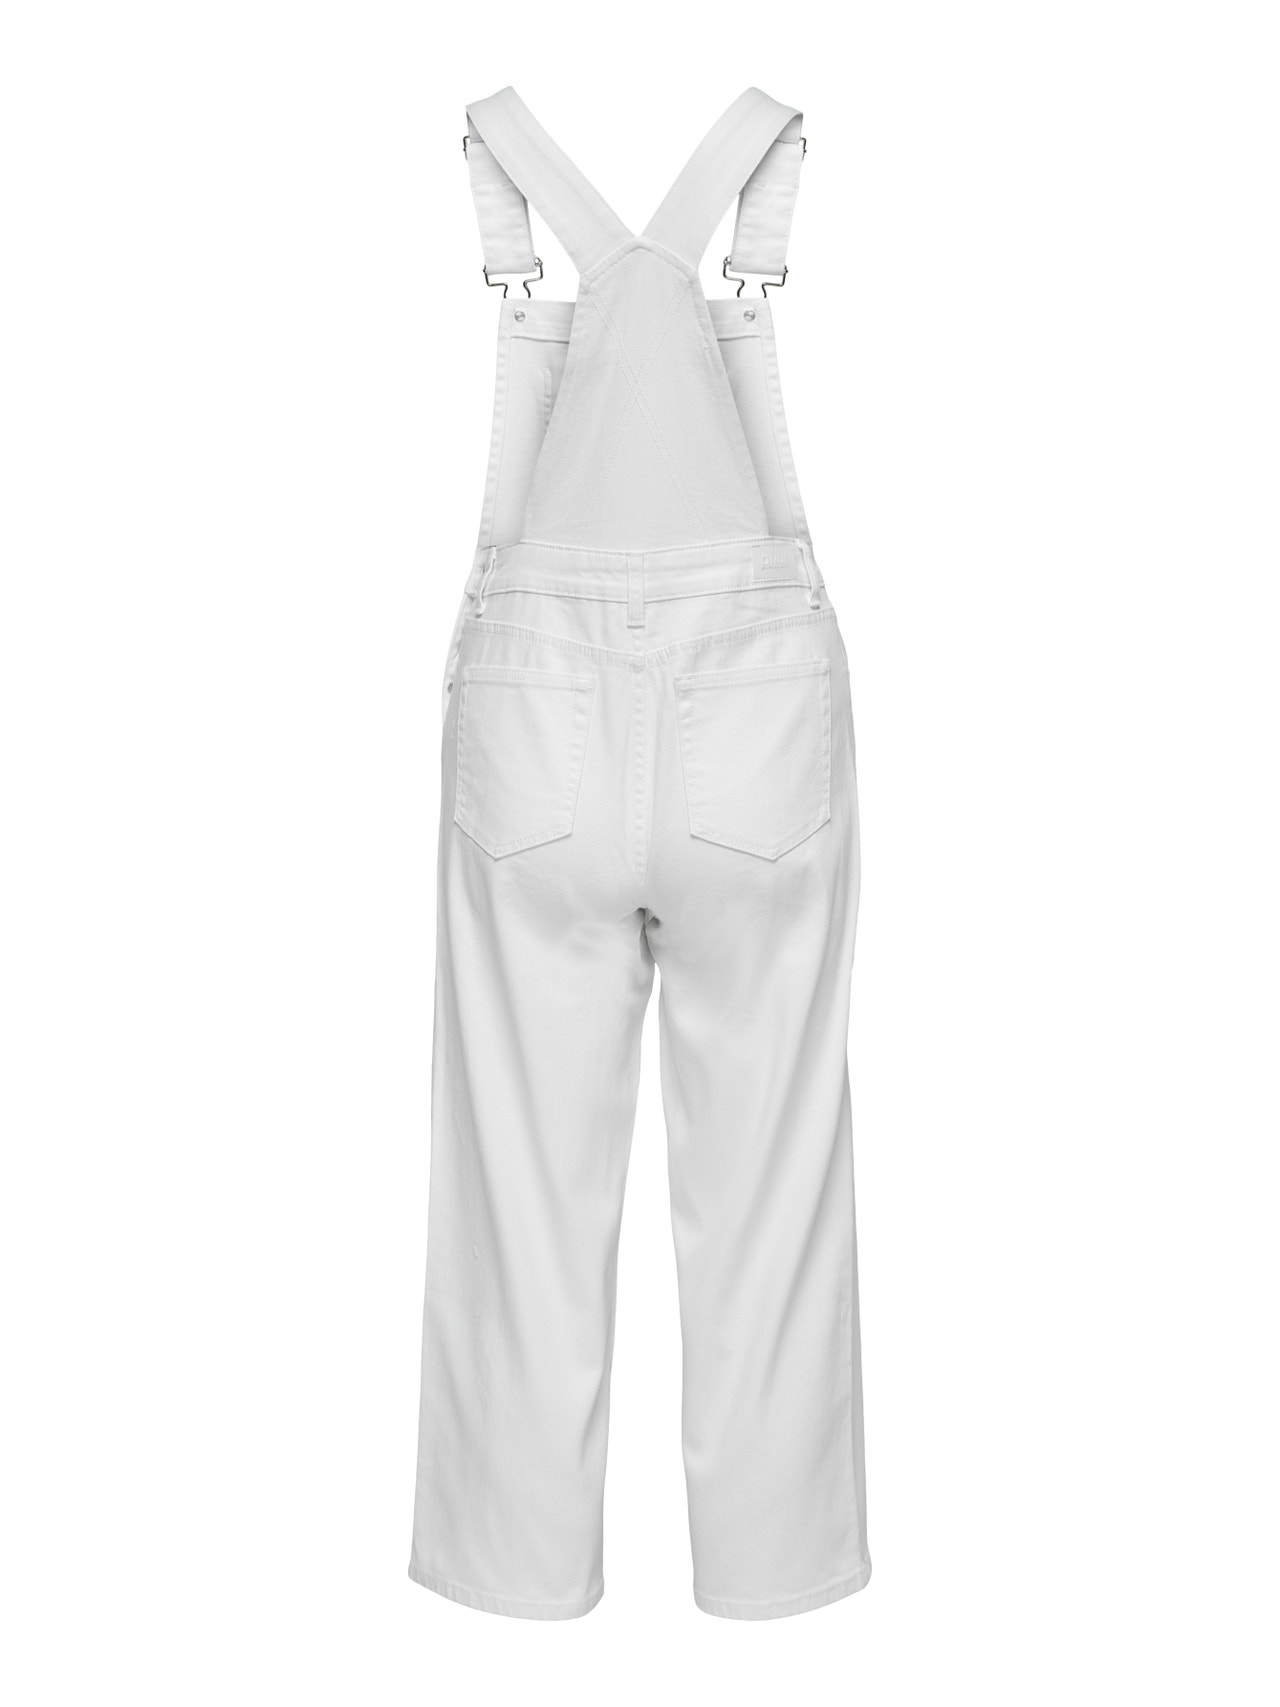 ONLY ONLCARNELLA DUNGAREE ANK -White - 15253901